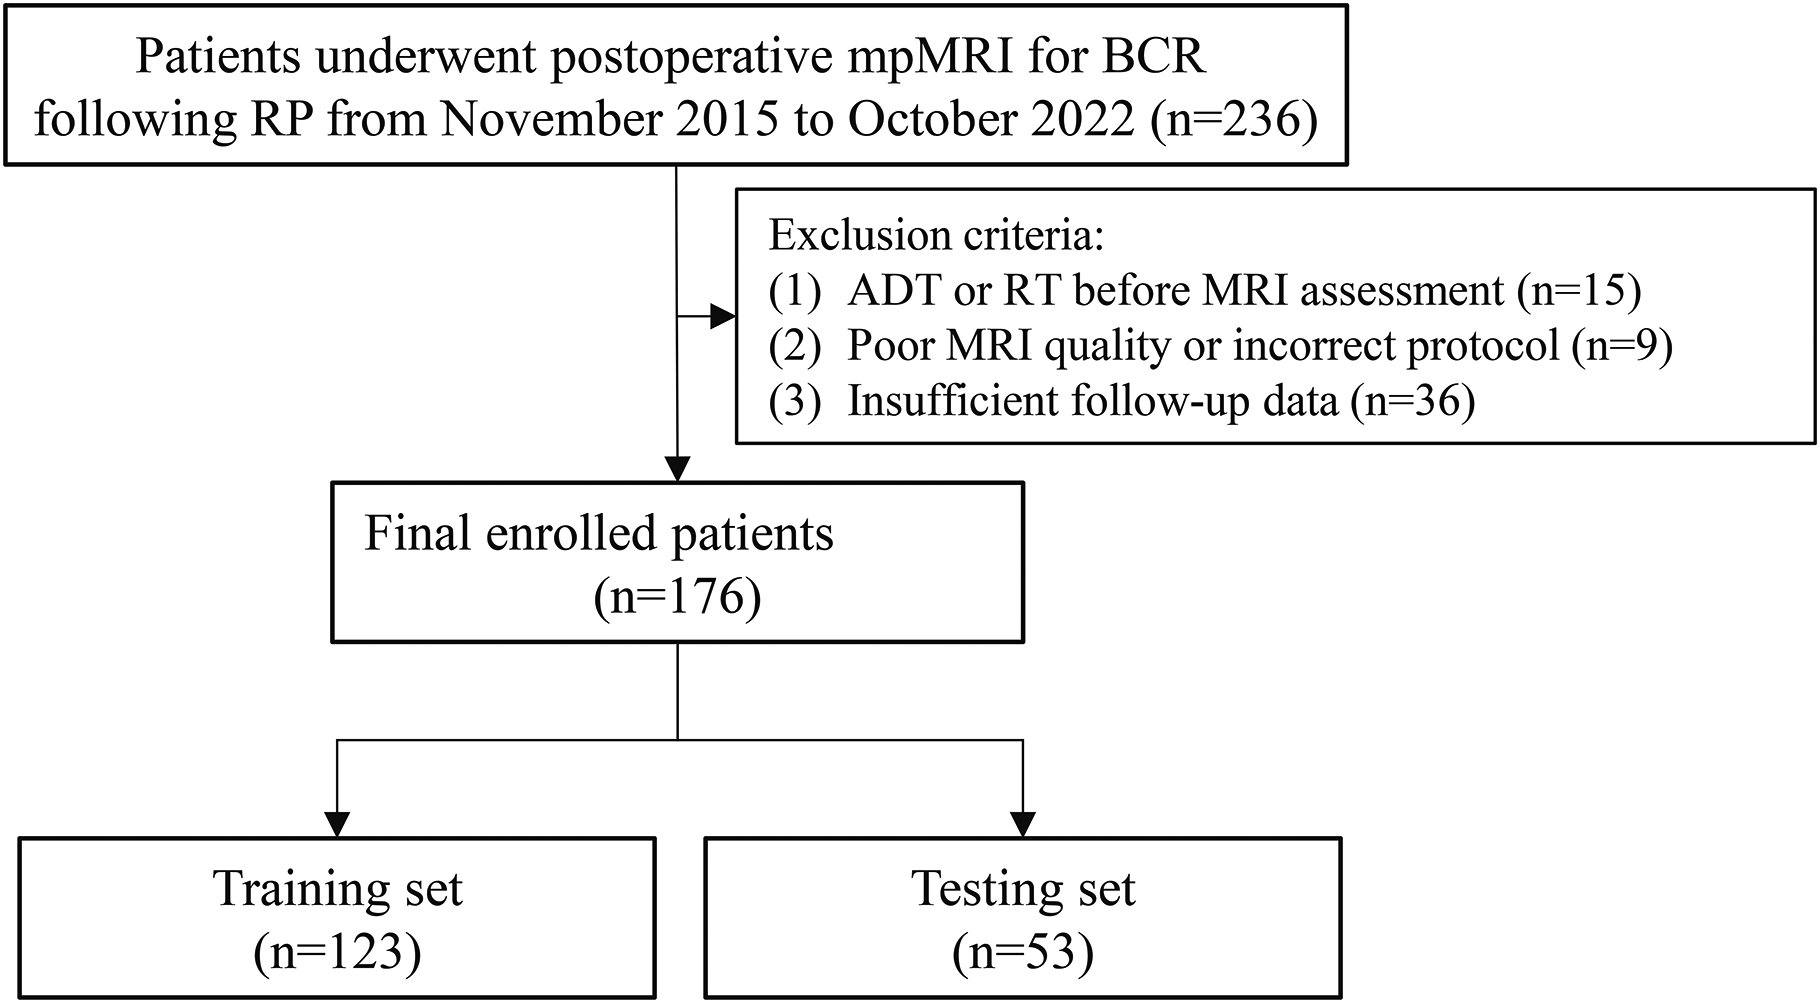 The practical clinical role of machine learning models with different algorithms in predicting prostate cancer local recurrence after radical prostatectomy